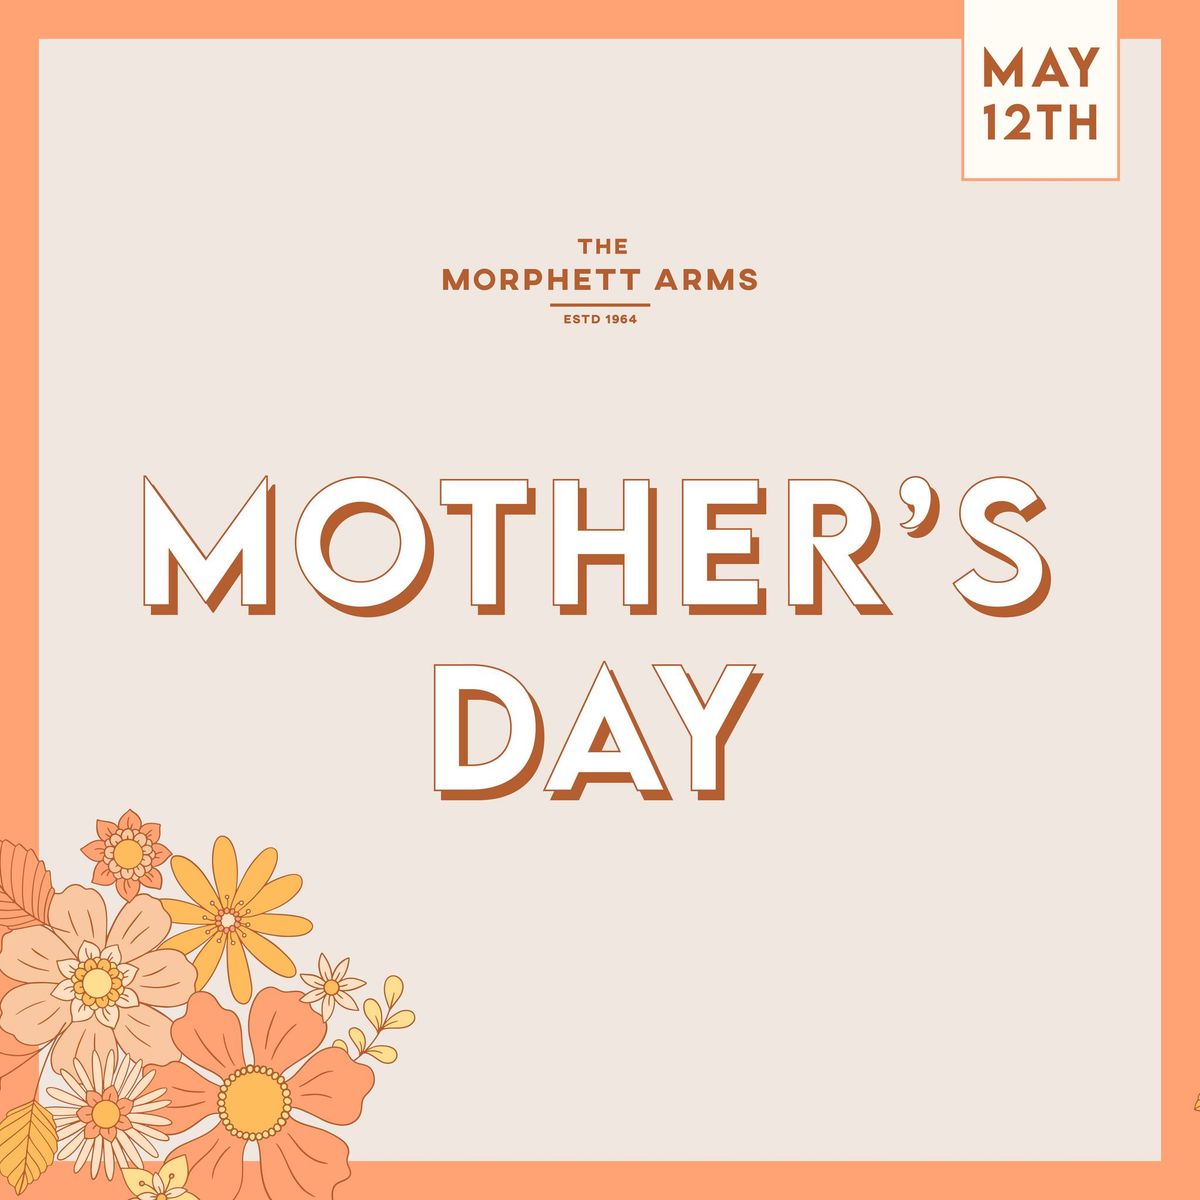 Mother's Day at The Morphett Arms